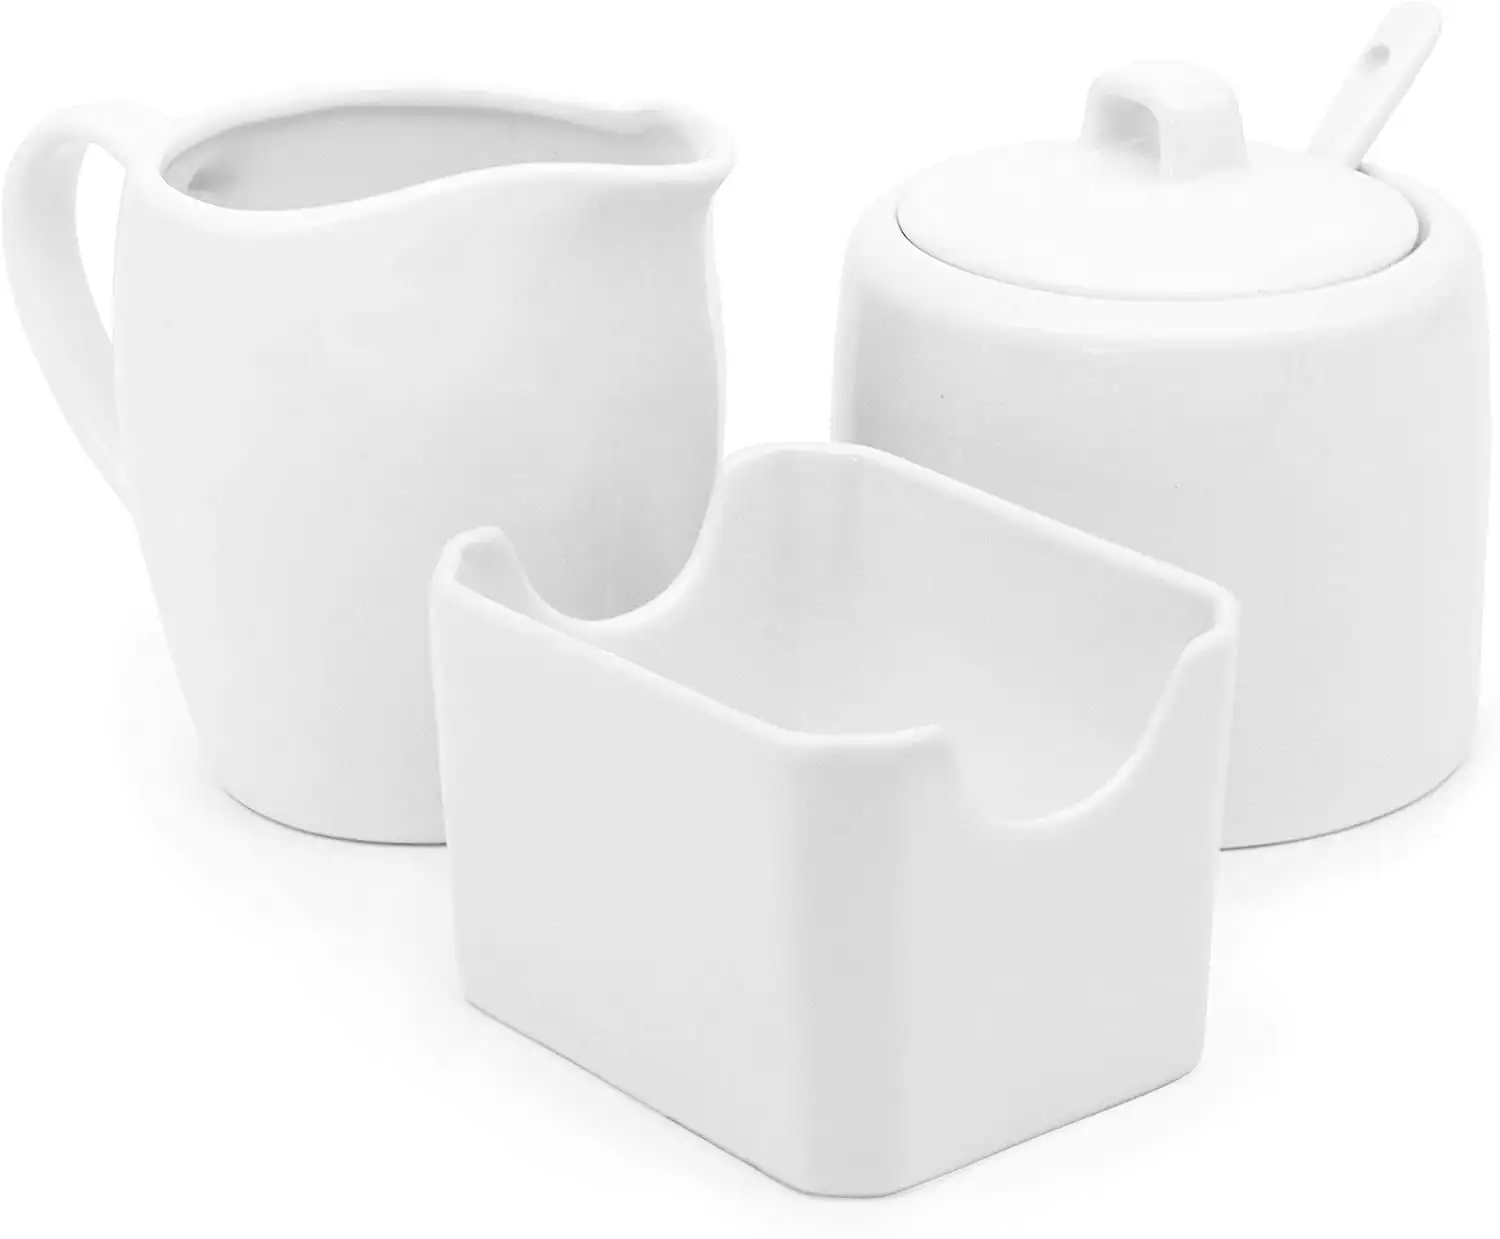 

Sugar and Creamer Set, 3 Piece, Pitcher, Sugar Bowl with Lid and Spoon, Sweetener Holder, White